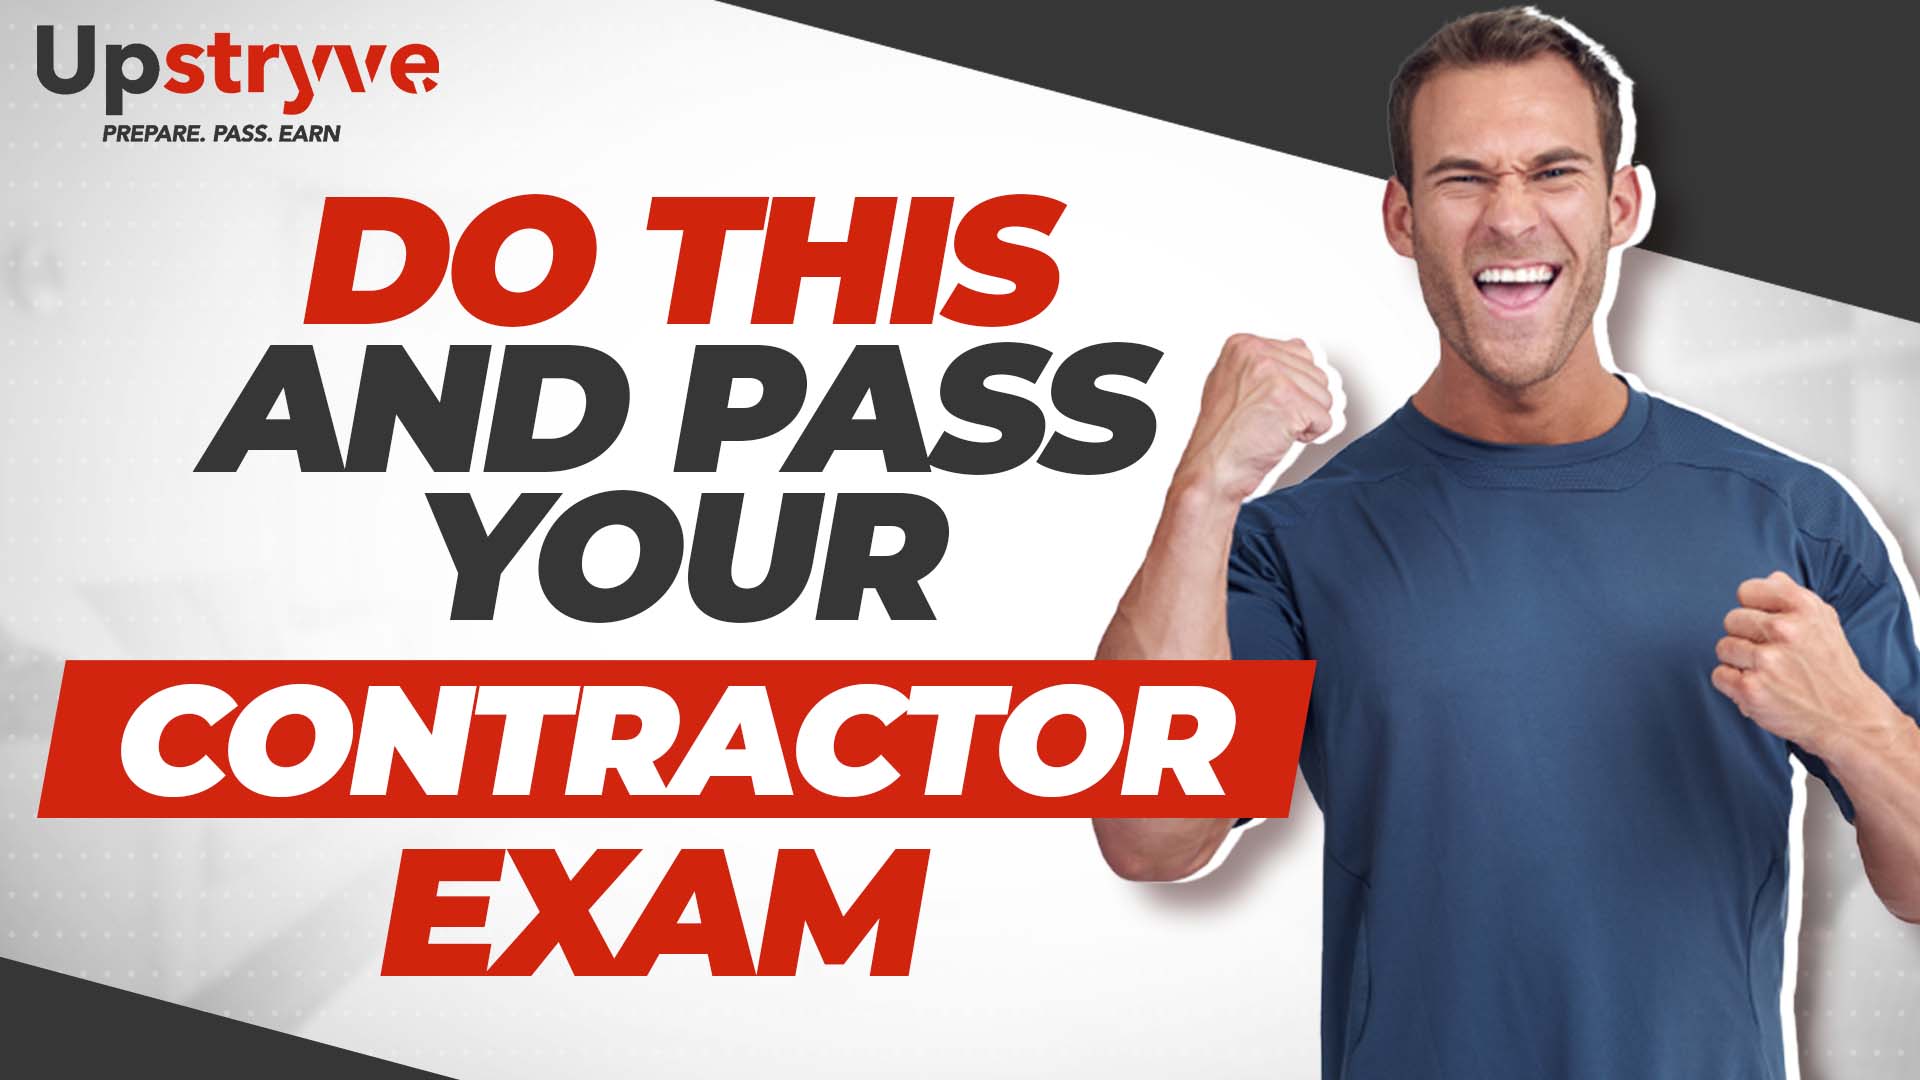 J.D Myers explains why it's so important to properly prepare for your contractor license exam. This is the key to passing your contractor license exam. 

This is one of the most difficult exams you could take and what makes it so challenging is the fact that it has more to do with your test-taking abilities vs your trade knowledge. 

Many veteran tradespeople fail this exam due to the fact that they believe they know everything that will be on the test, but that is just not the case. These exams are designed to be difficult to pass. 

That is why Upstryve provides books, courses, rental packages, highlighted and tabbed books, and 1-on1 online tutoring. We want to give you the best chance possible to pass your contractor license exam on the first attempt.